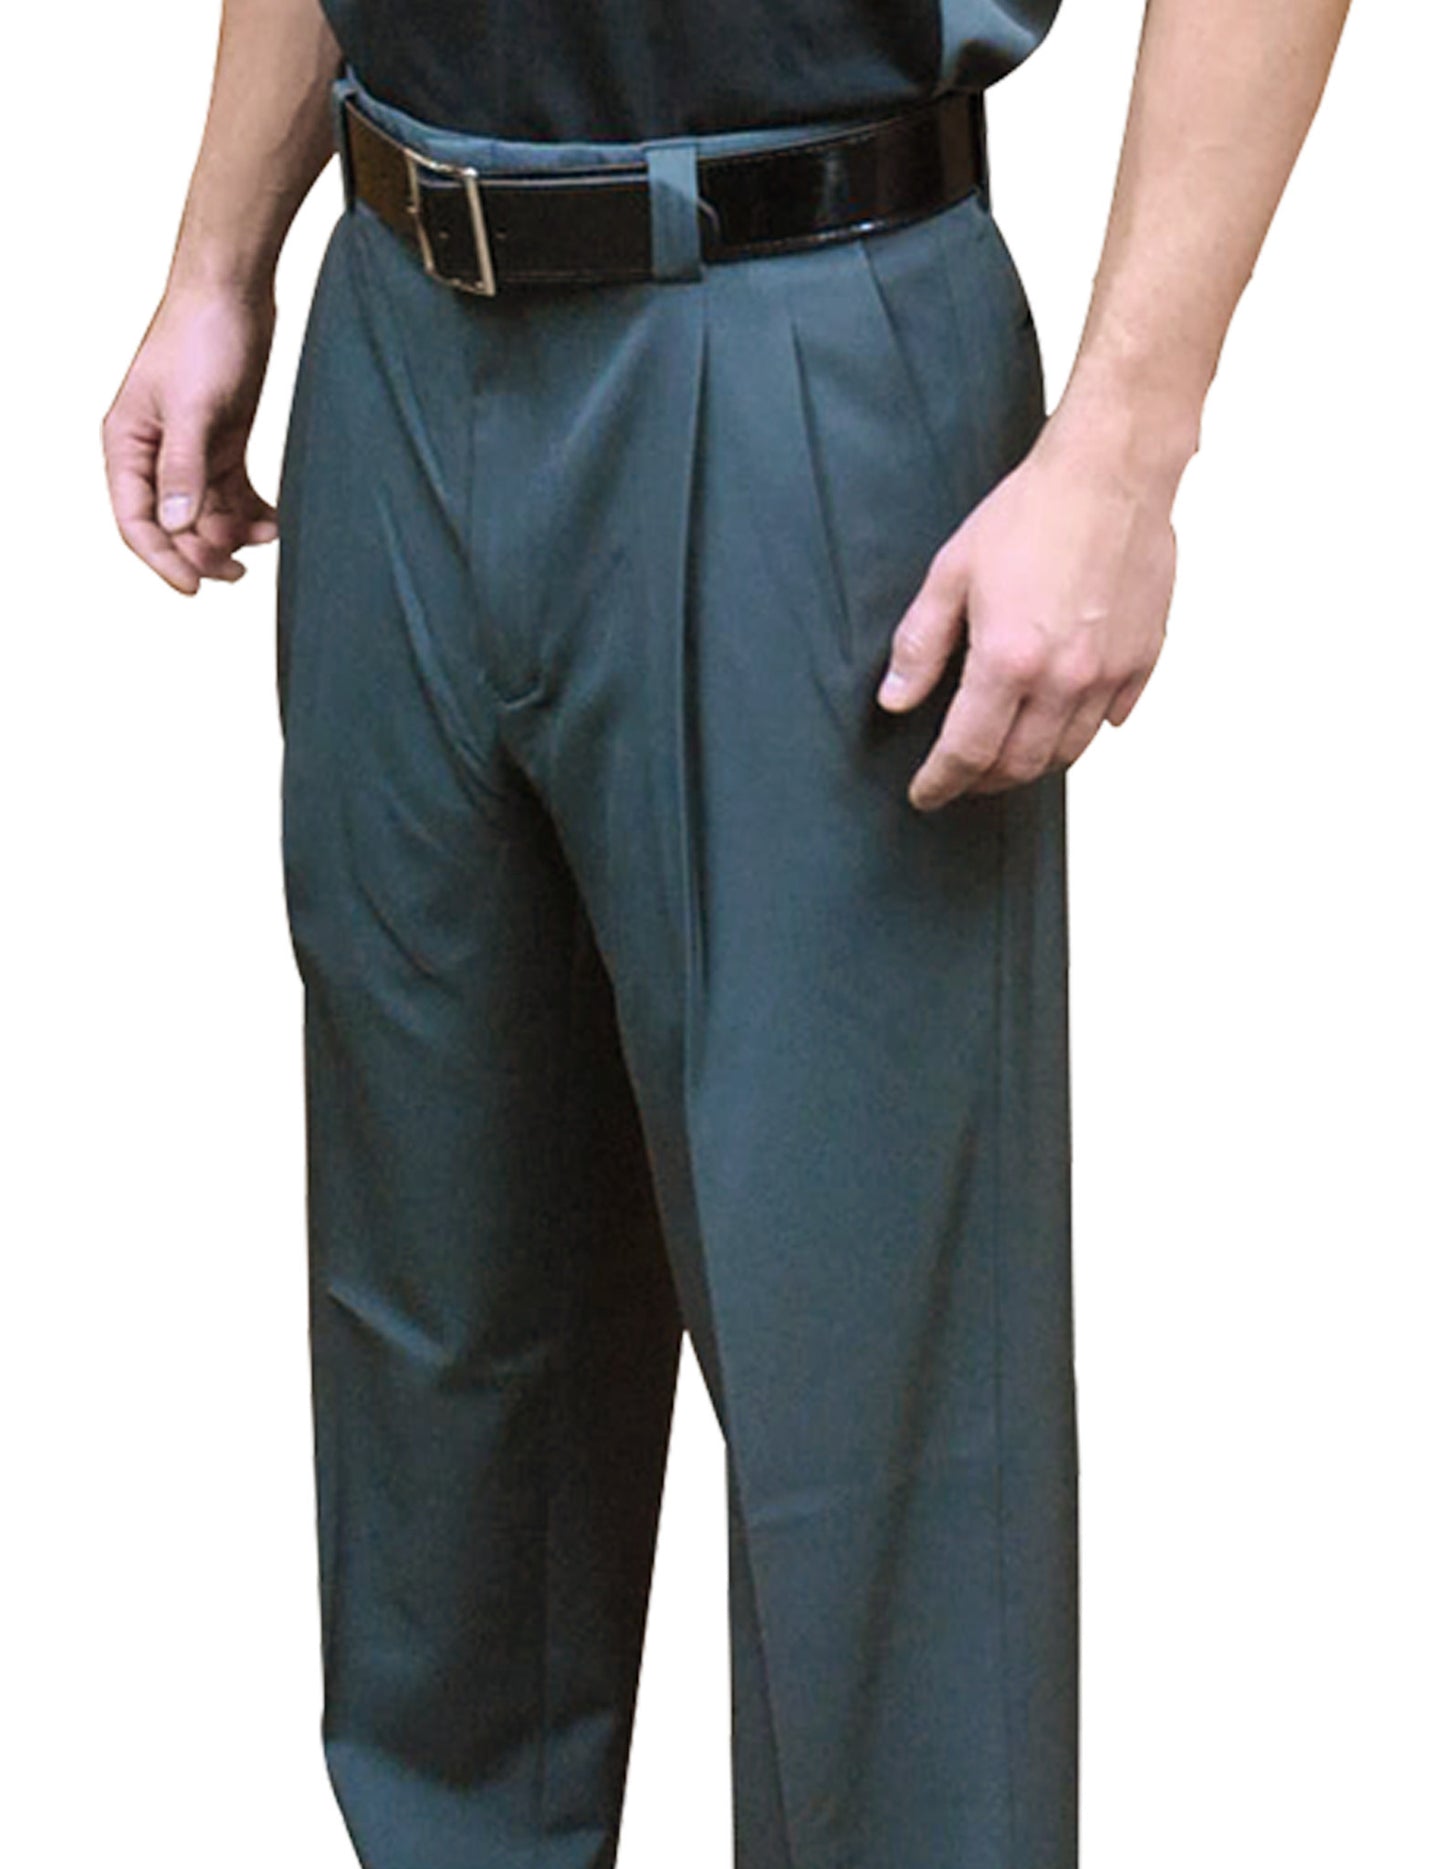 BBS391-Smitty "4-Way Stretch" Pleated Combo Pants-Charcoal Grey Only